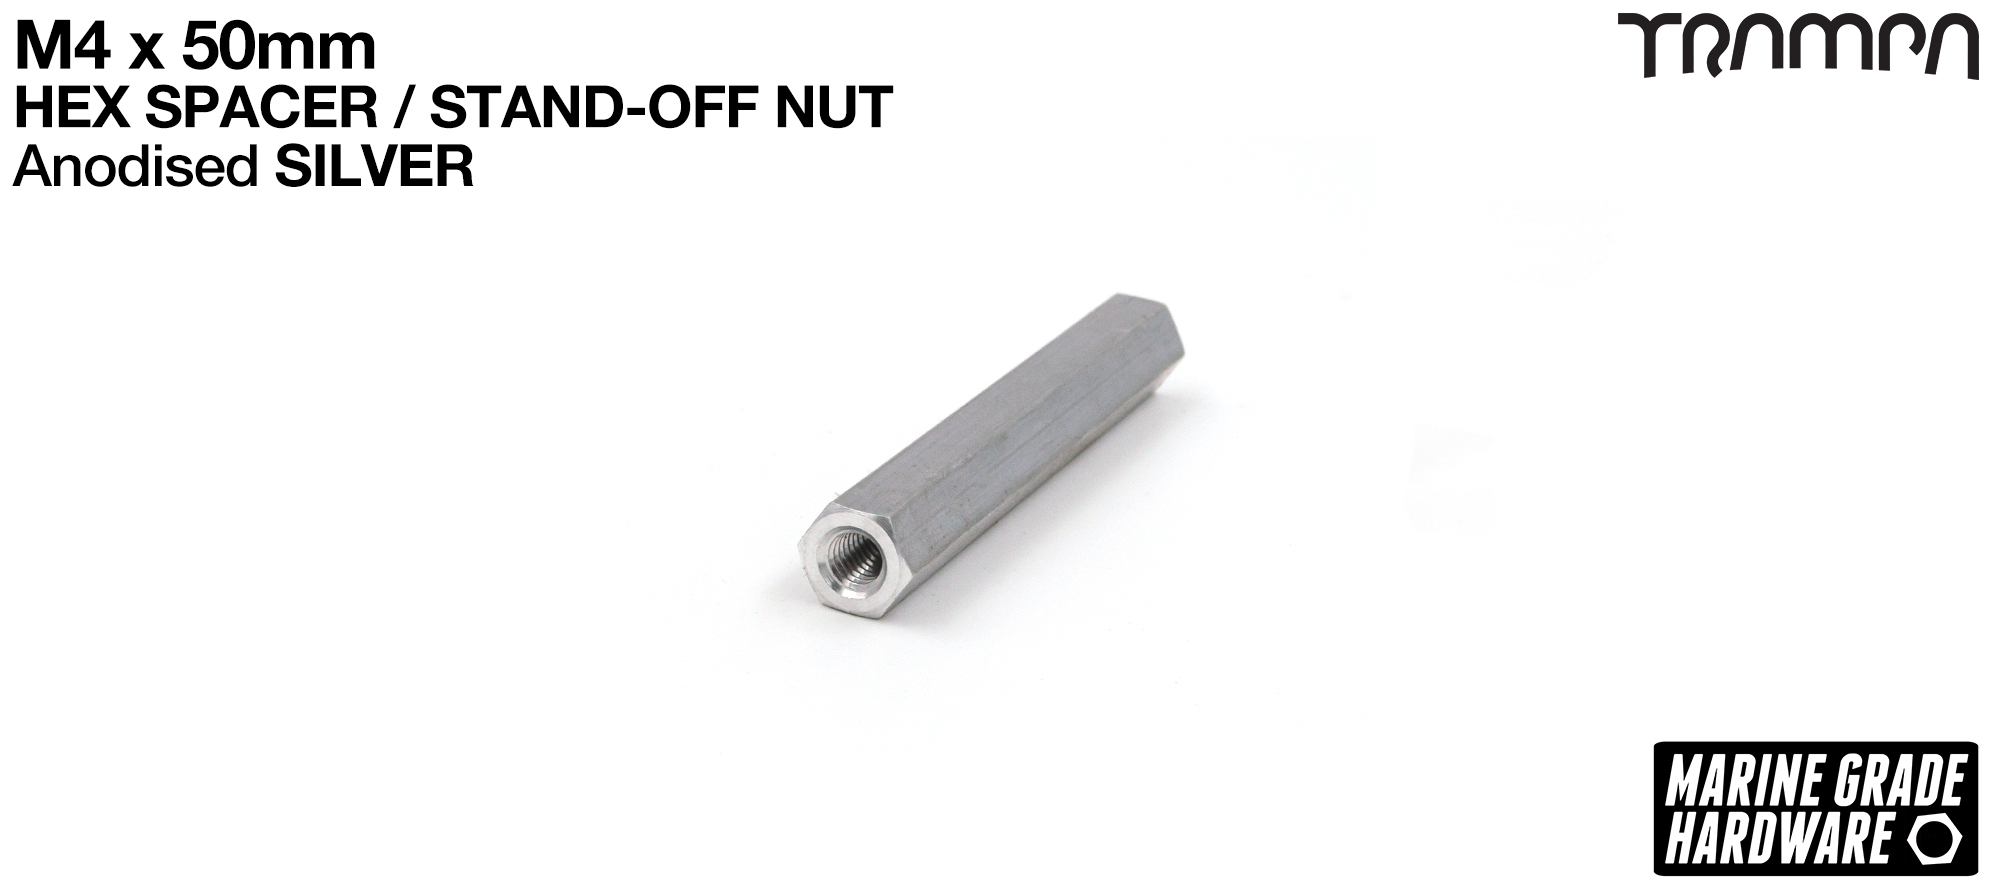 M4 x 50mm Aluminium Threaded HEX Spacer Nut used for assembling the MONSTER Battery Boxes - SILVER